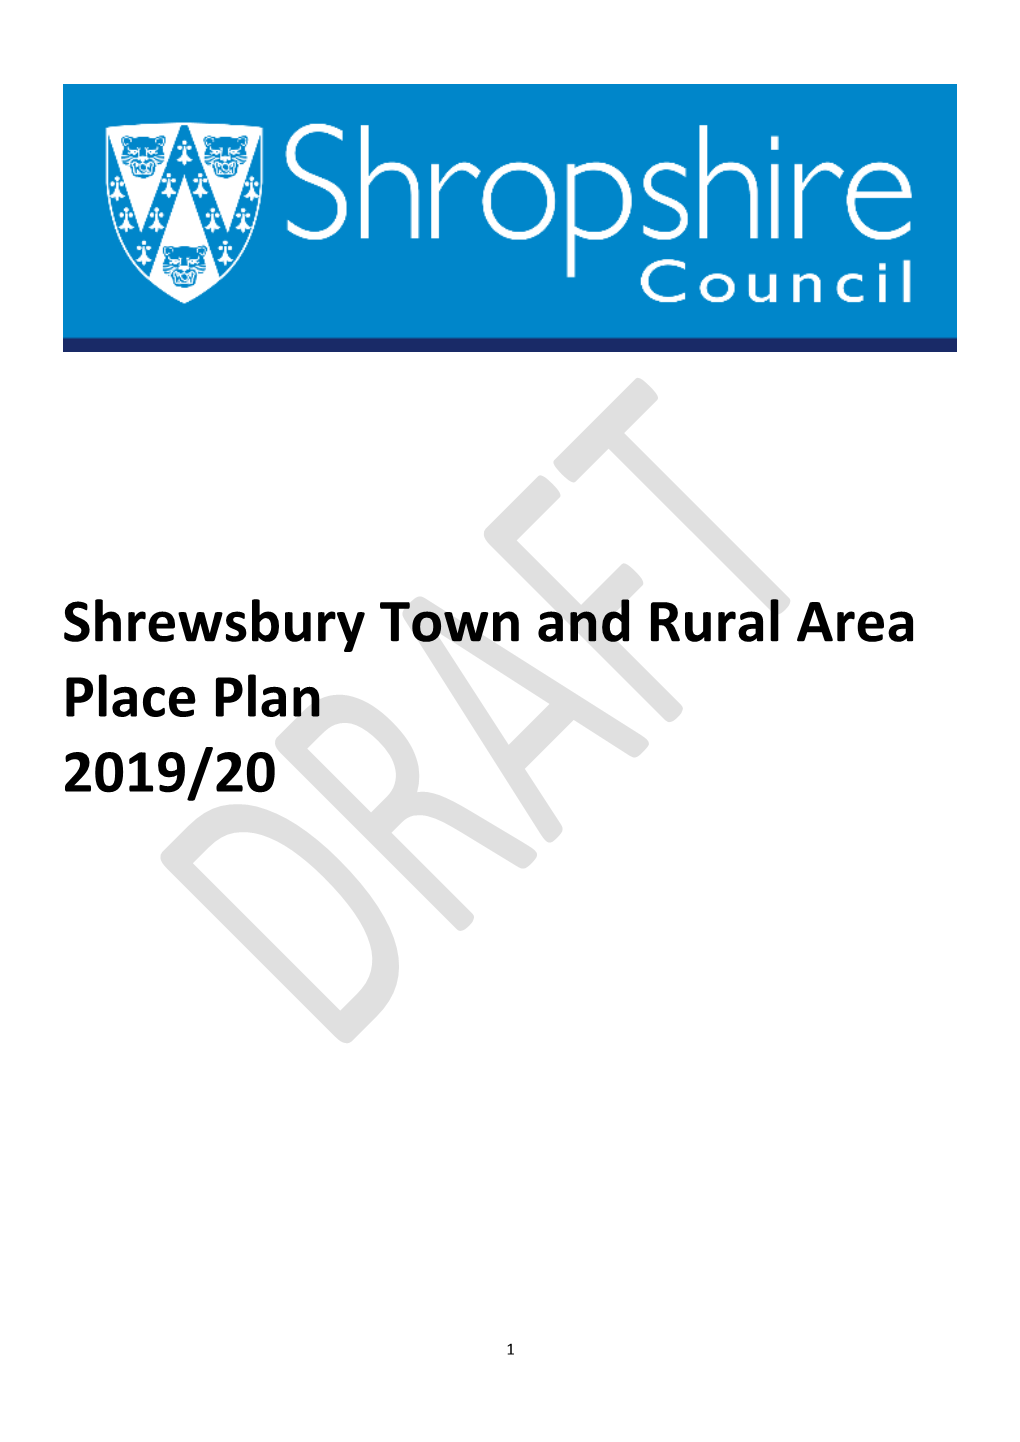 Shrewsbury Town and Rural Area Place Plan 2019/20